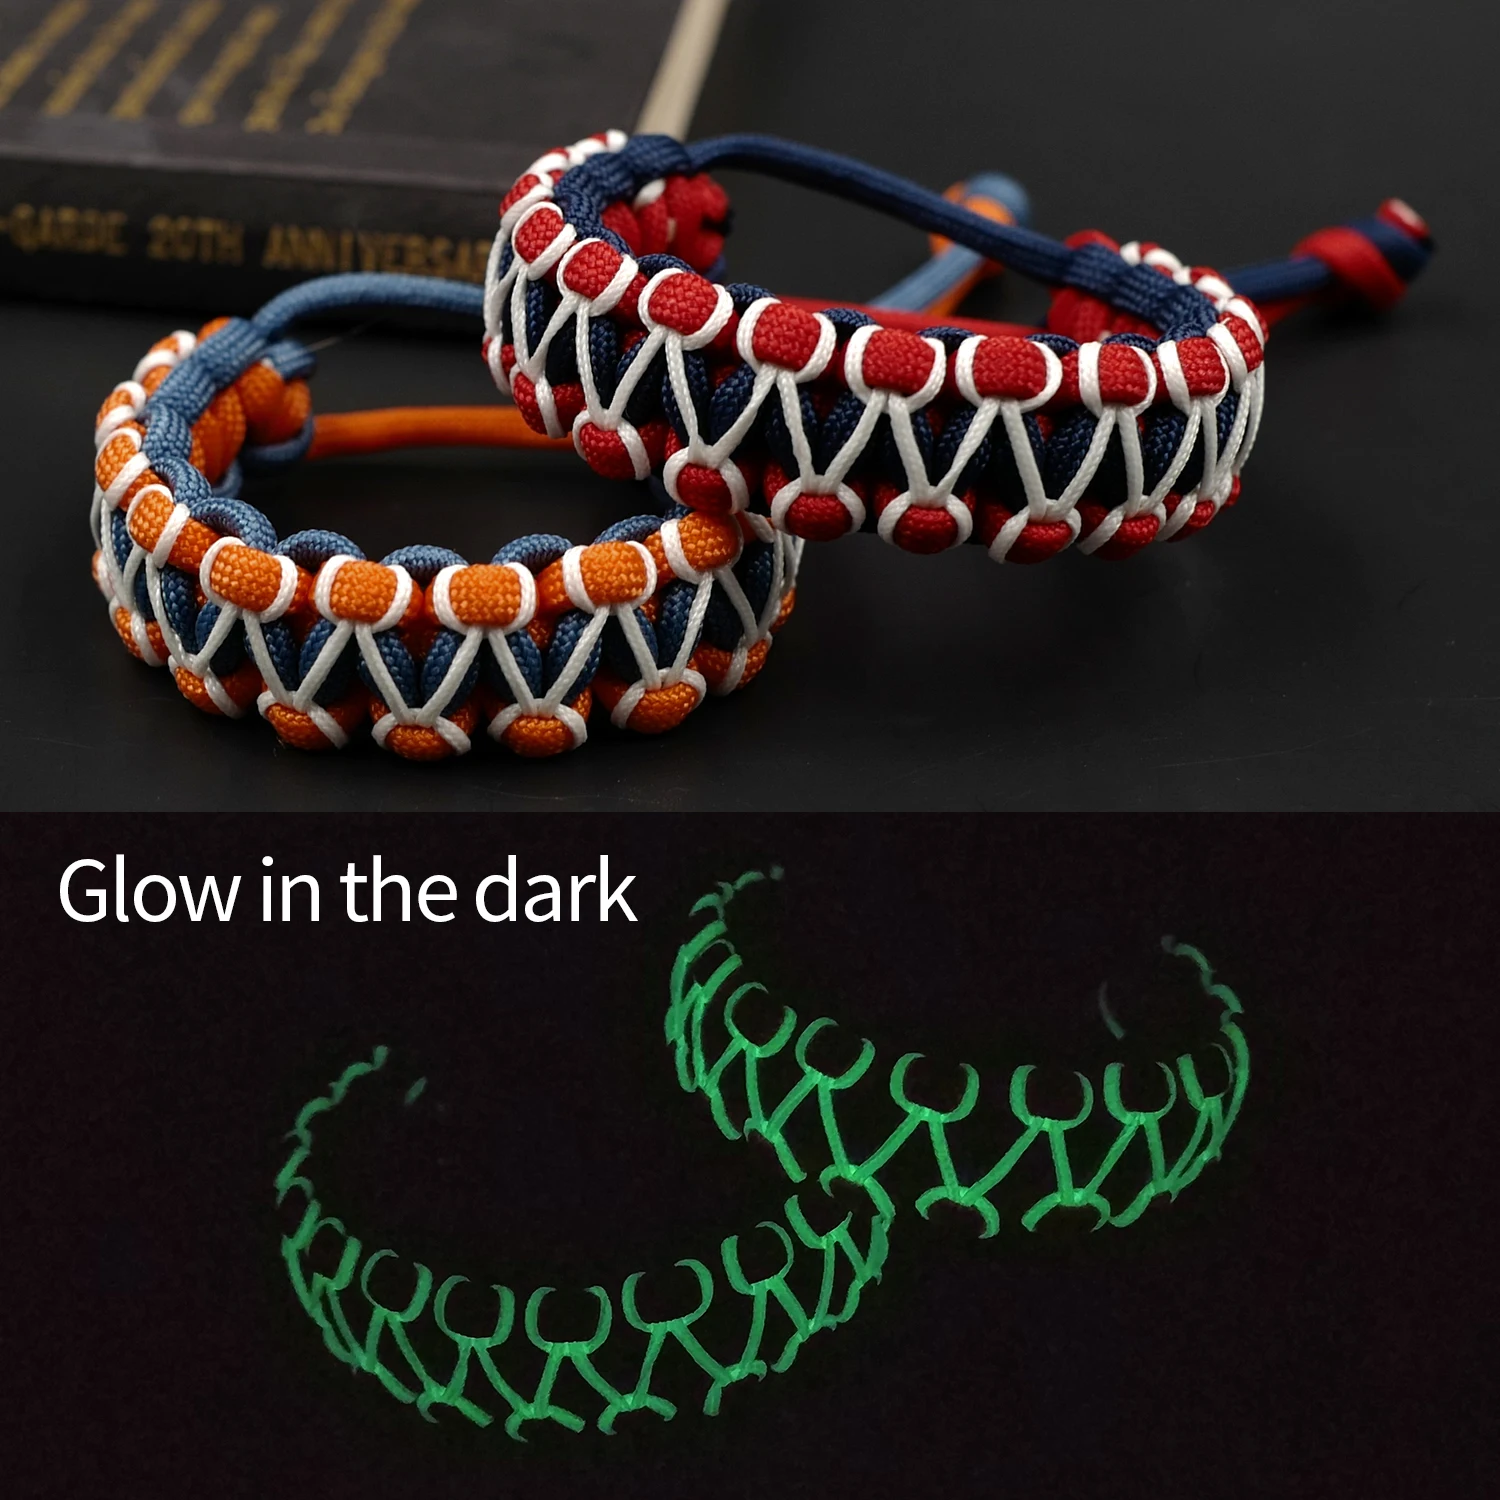 Adjustable Survival Emergency Glow in the Dark 550 Paracord Bracelet Parachute Cord Bracelet Wristband Camping Hiking Hand-made